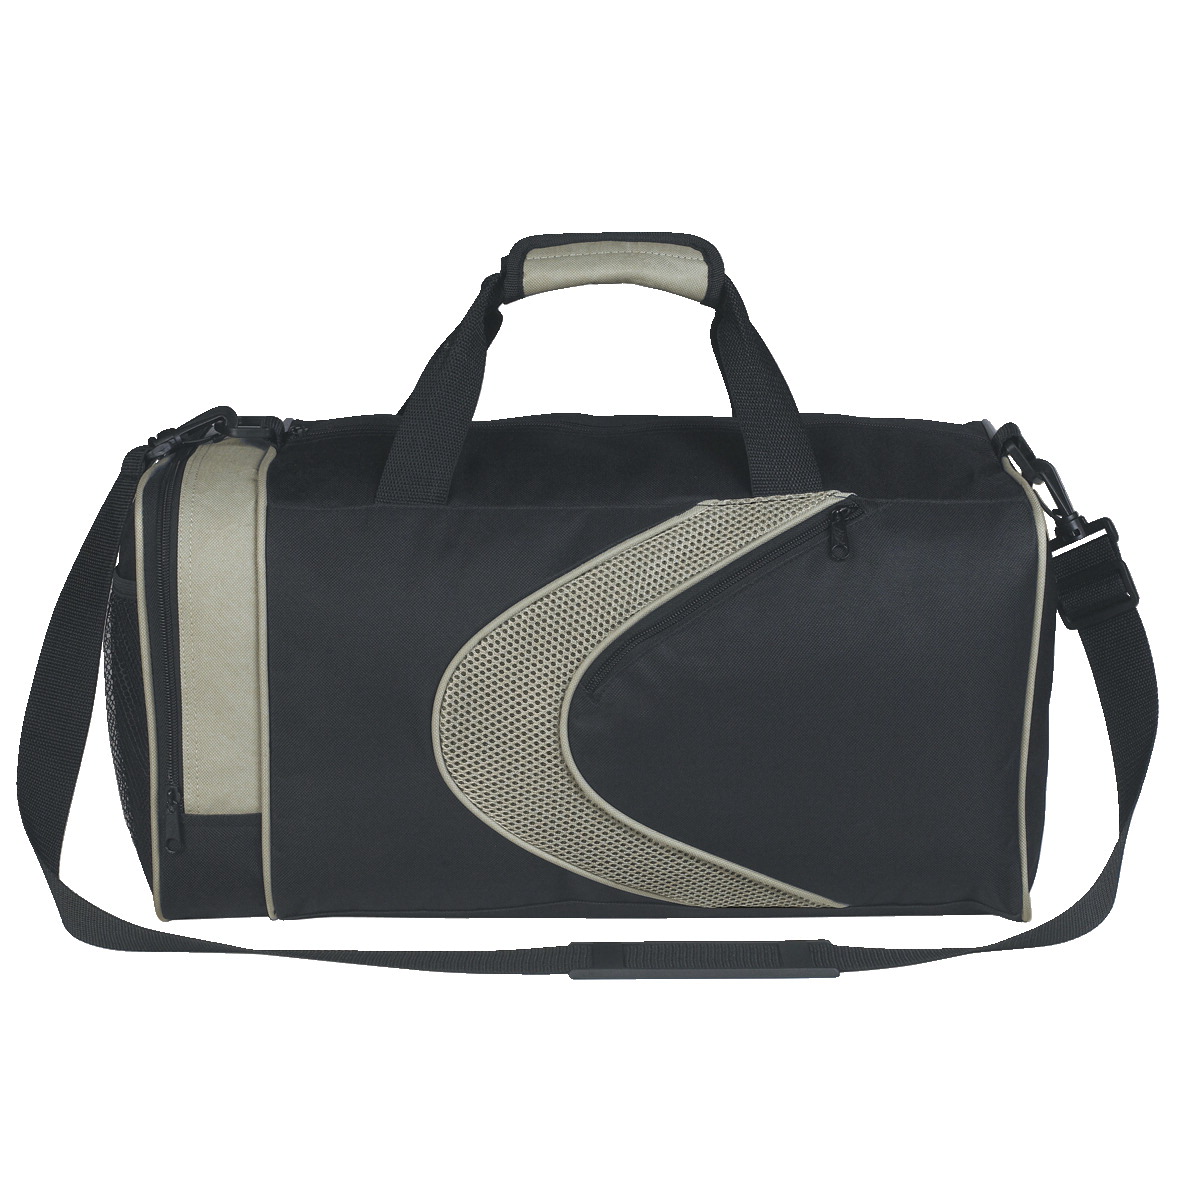 19 X 10 In. Sports Duffle Bag, Polyester & Microfiber - Black With Gray